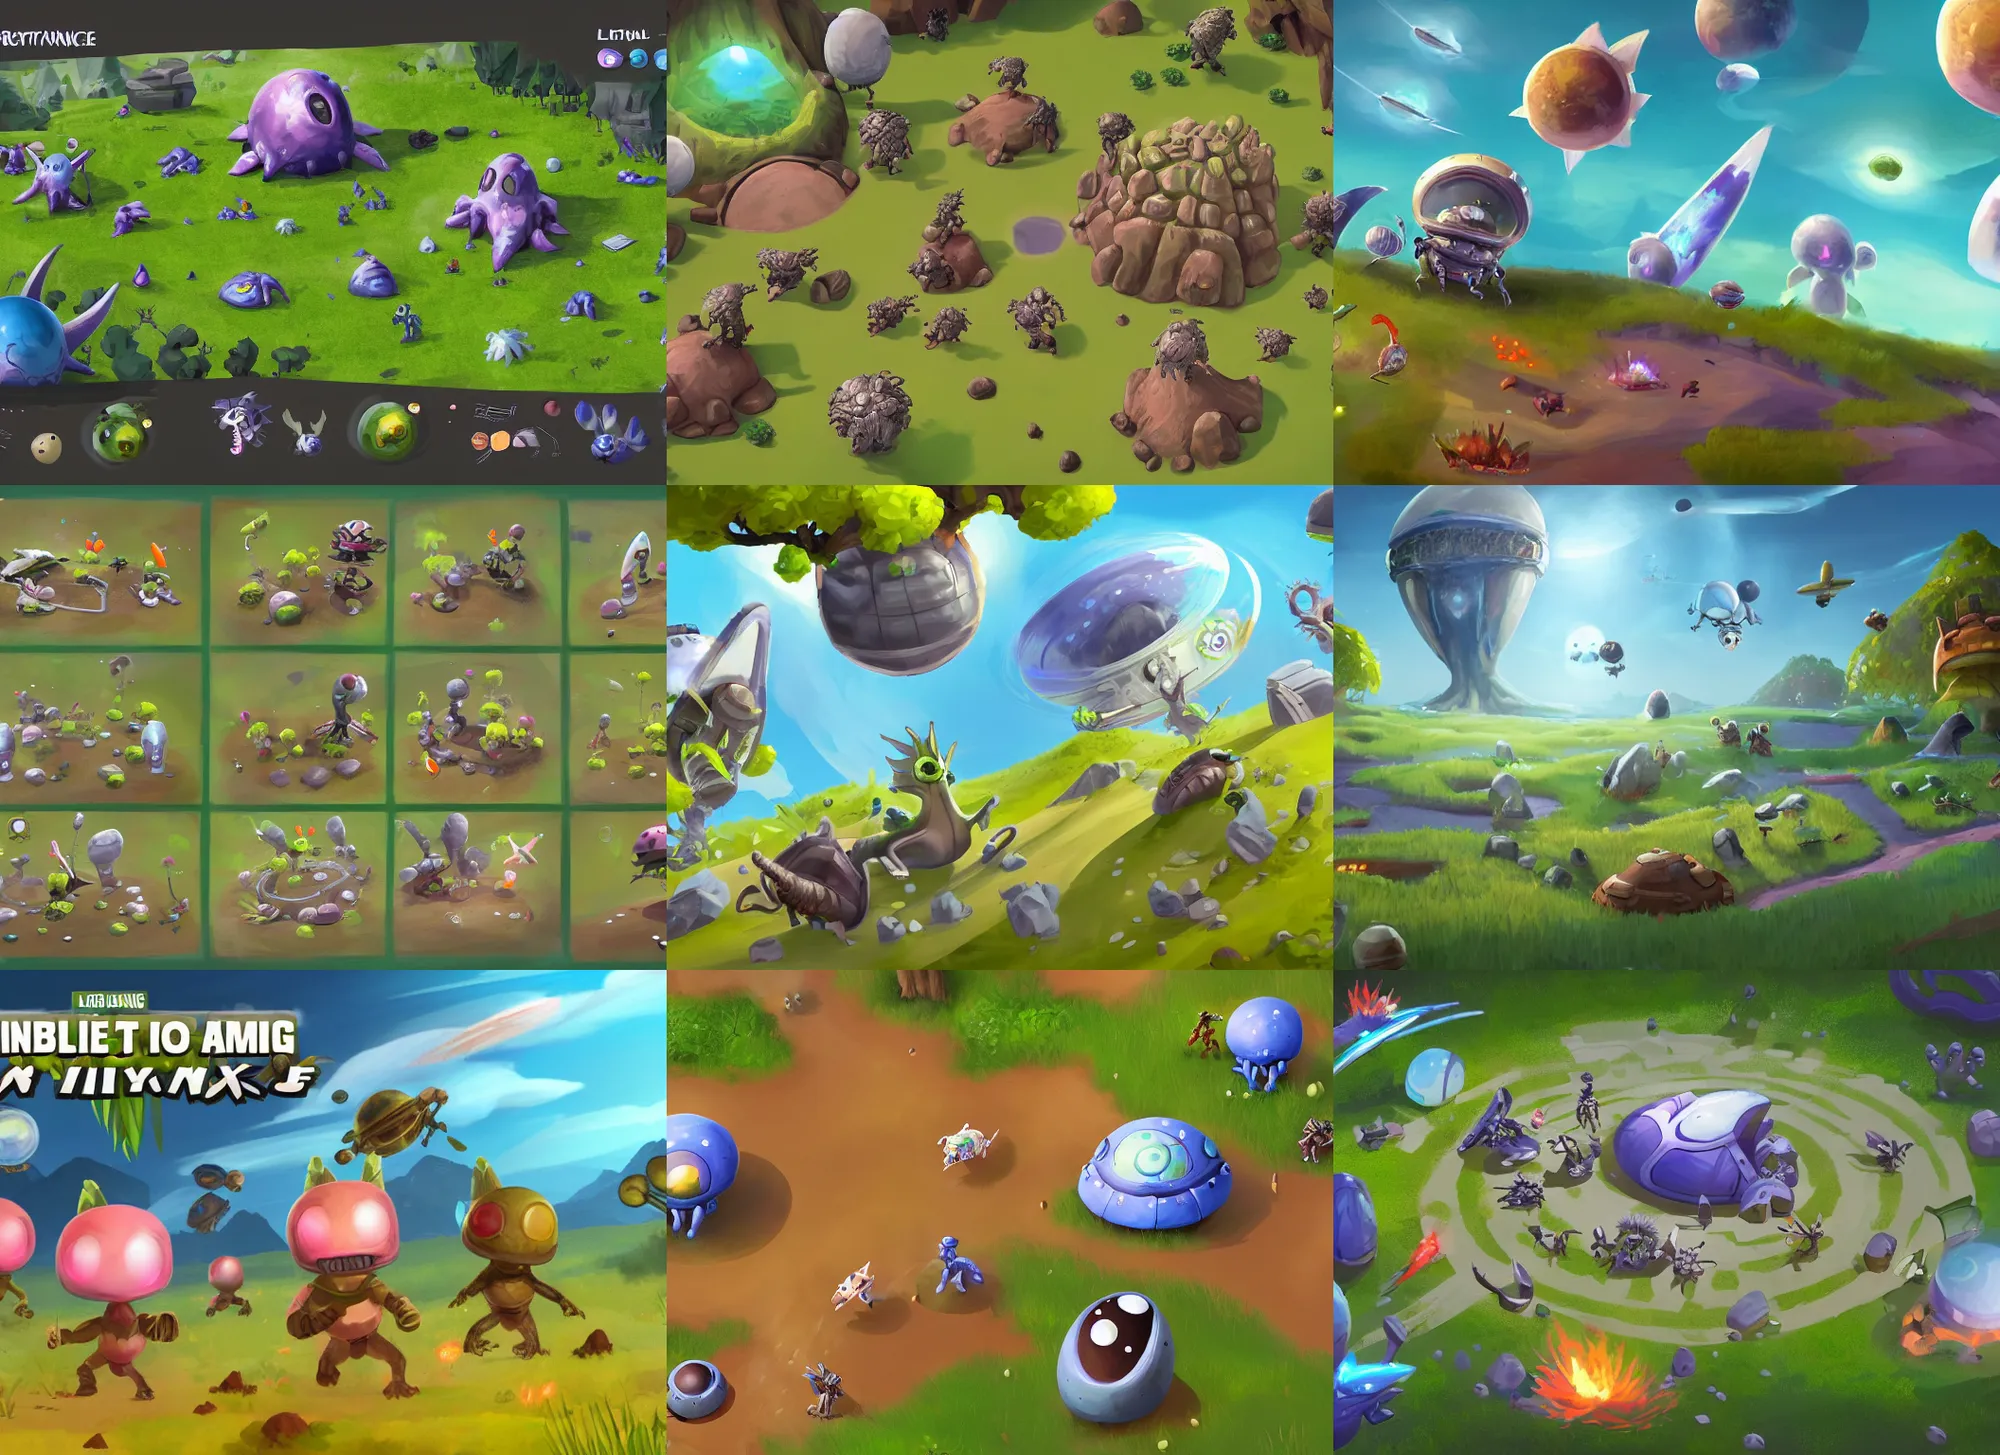 Prompt: a landing scene for mobile battle royale game about alien cute little animals that land on a planet with different biomes, craters, alien capsules, bushes in the visual style of Spore and Eternal Cylinder, start of the match, full team, 3rd person view, medium shot, concept art